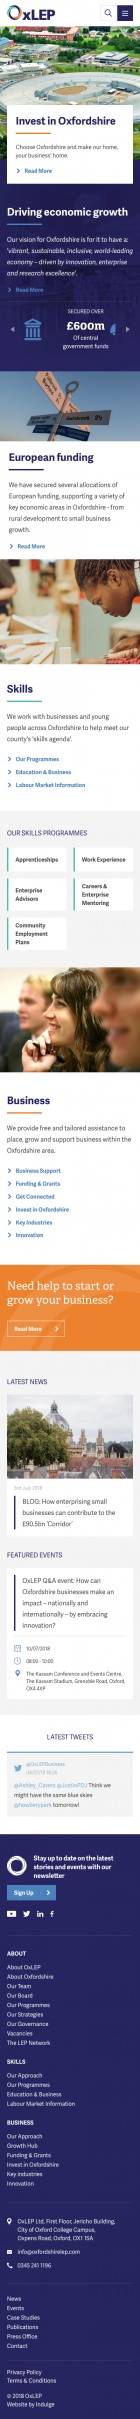 OxLEP website homepage screenshot on mobile device